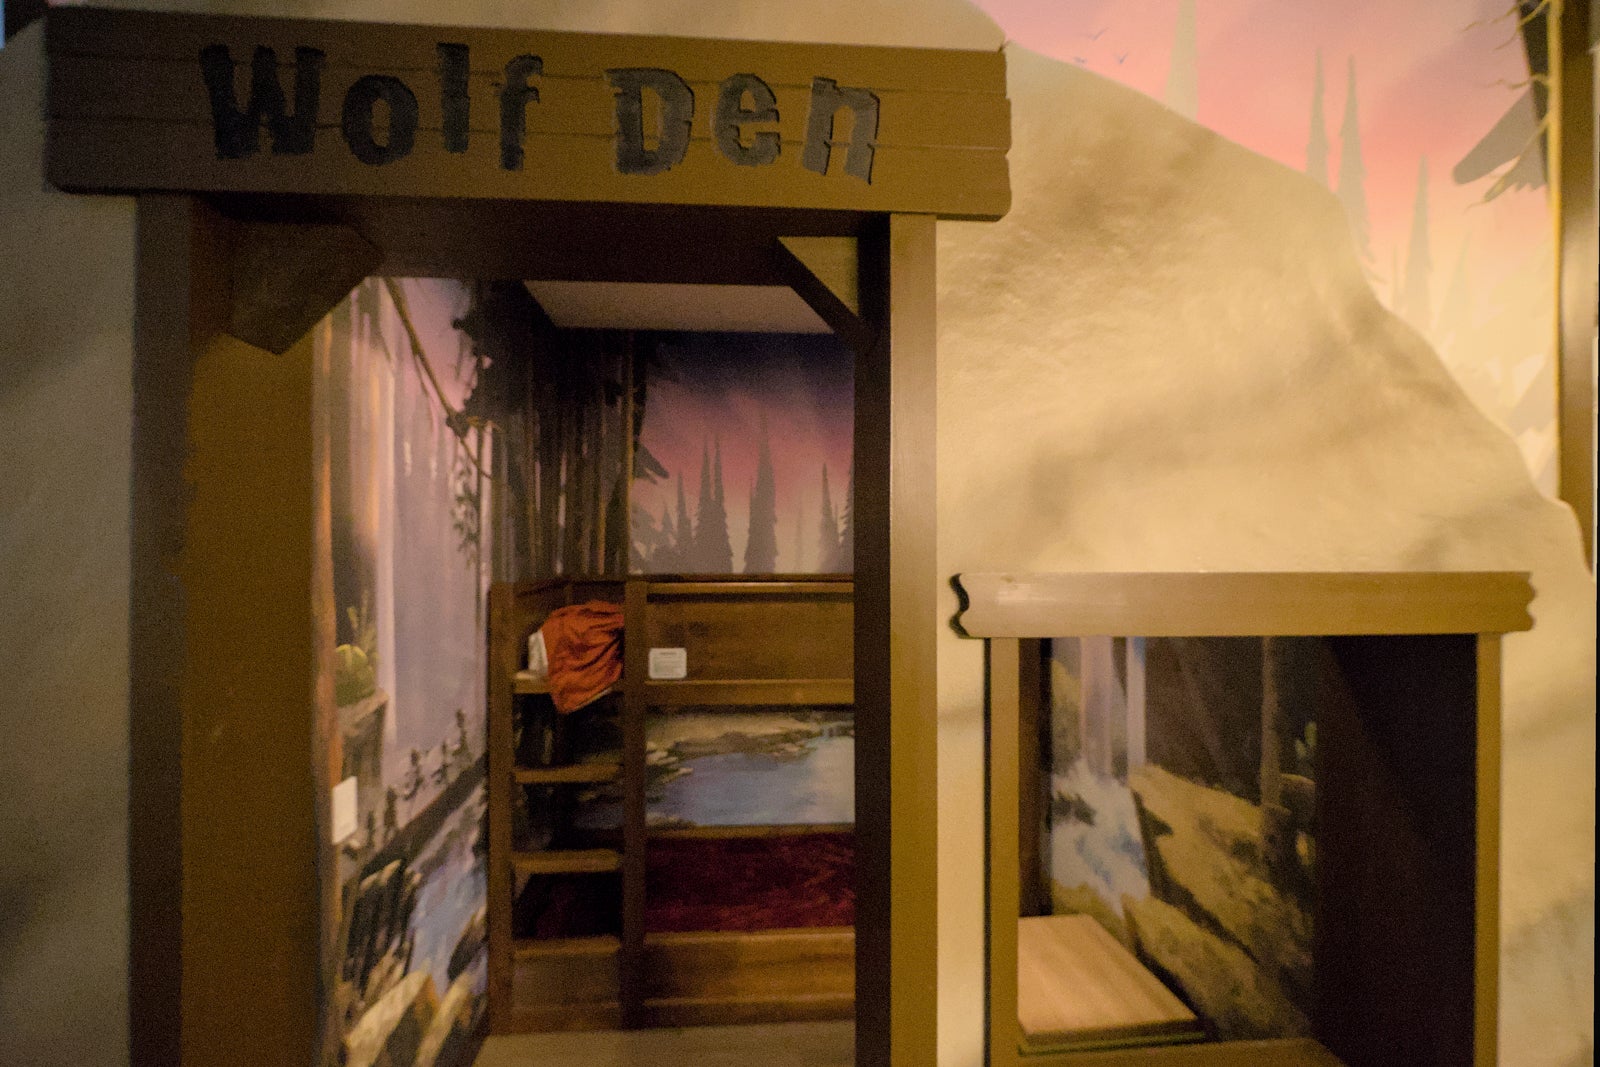 Wolf Den themed family suite at Great Wolf Lodge Maryland.